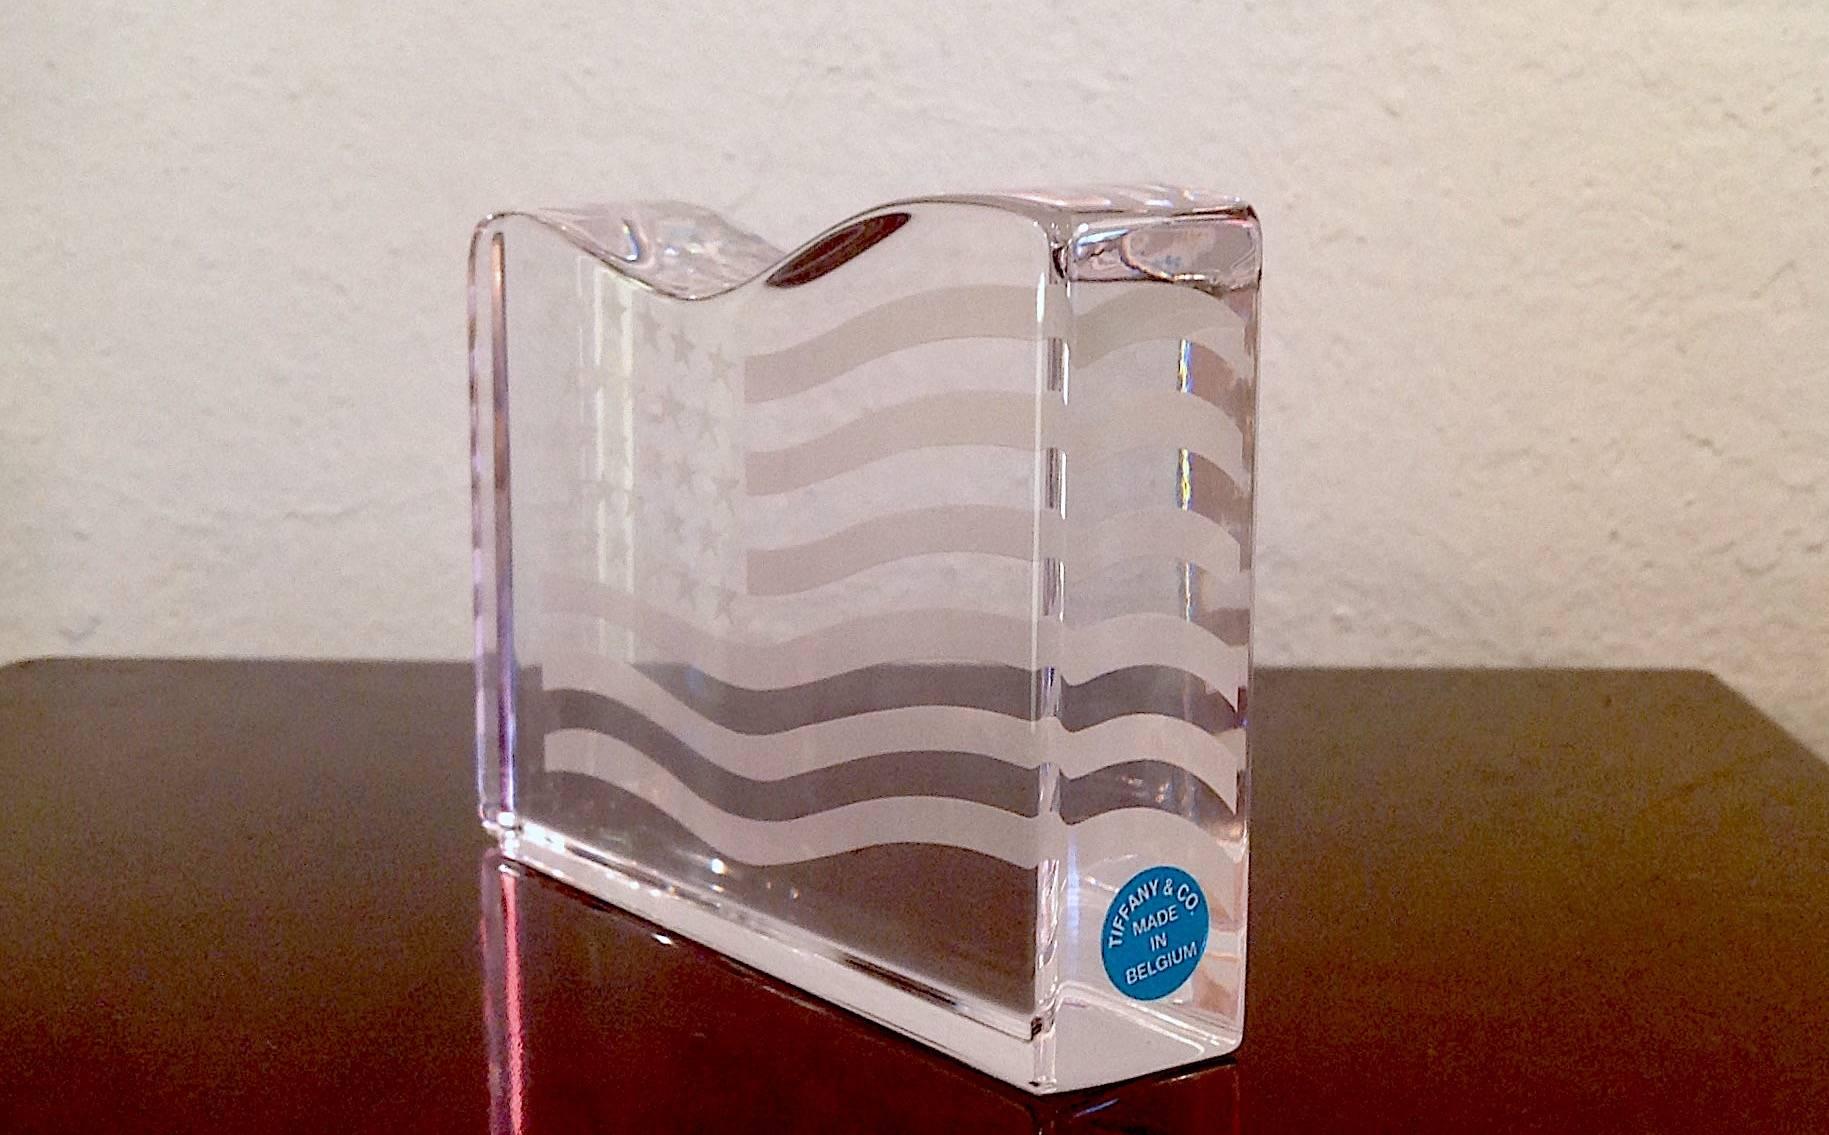 Tiffany & Co. American flag crystal paperweight, desk accessory, signed "Val St. Lambert - DeSorss" and "Tiffany & Co."